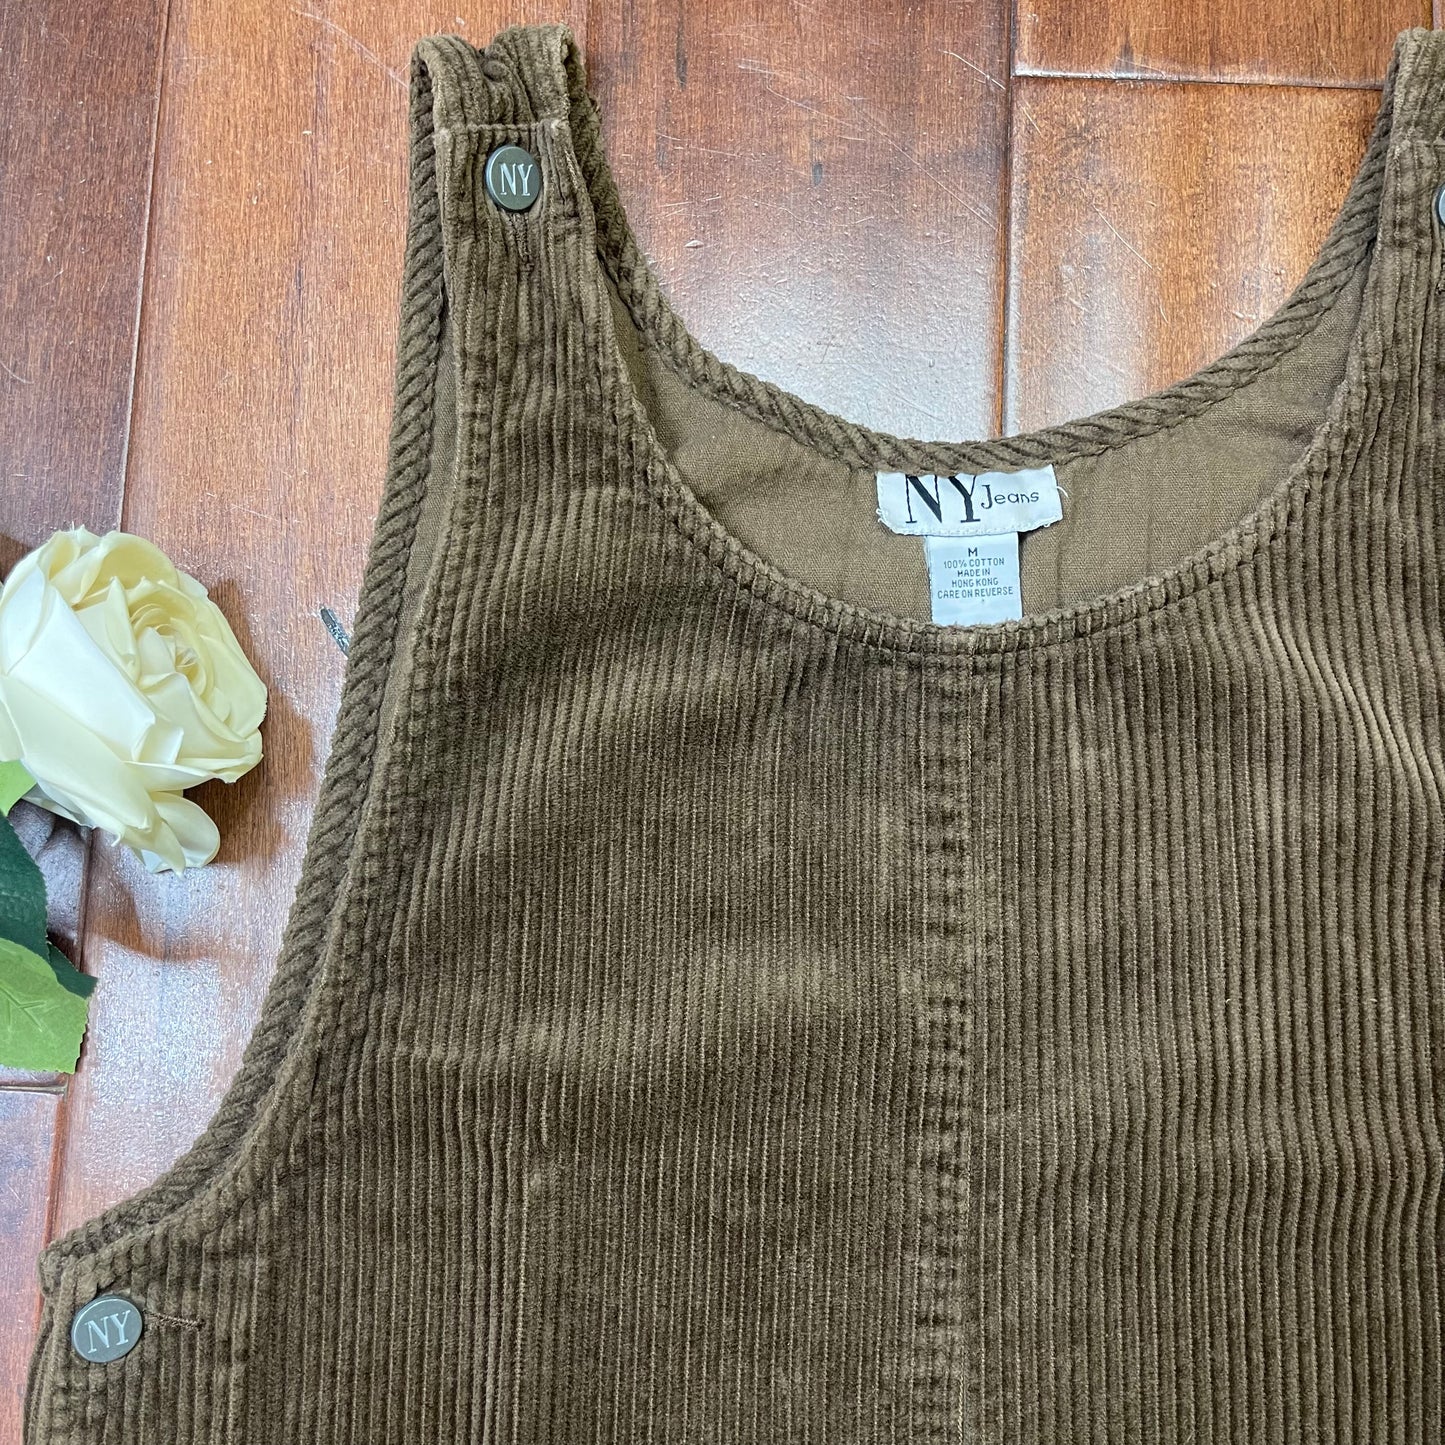 VINTAGE NY JEANS CORDUROY OVERALL DRESS